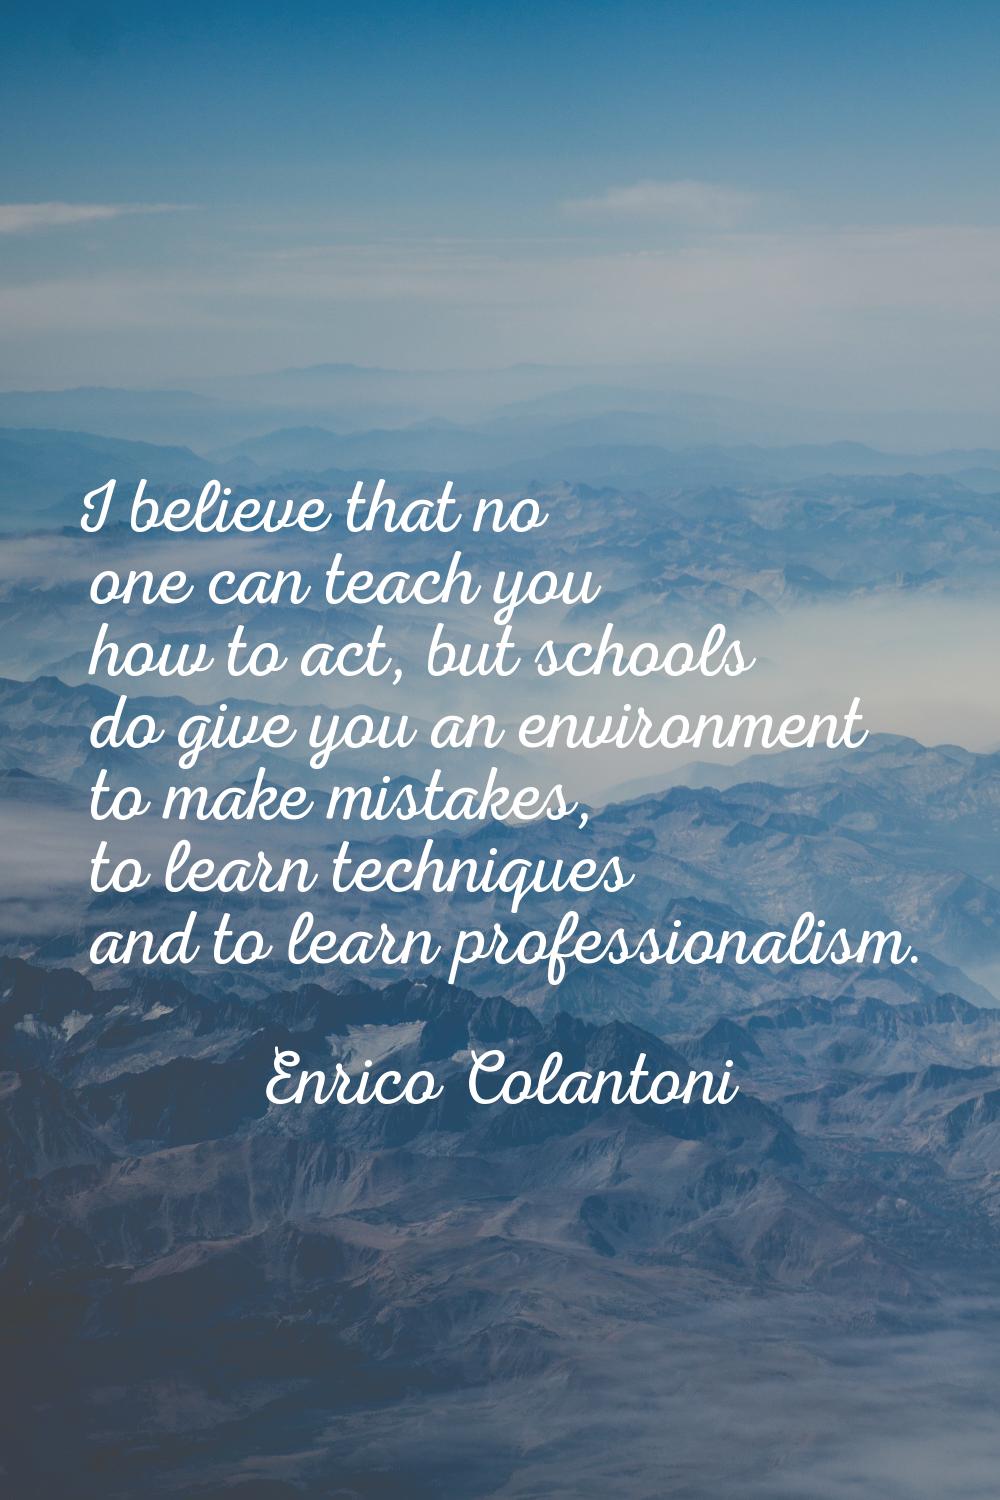 I believe that no one can teach you how to act, but schools do give you an environment to make mist